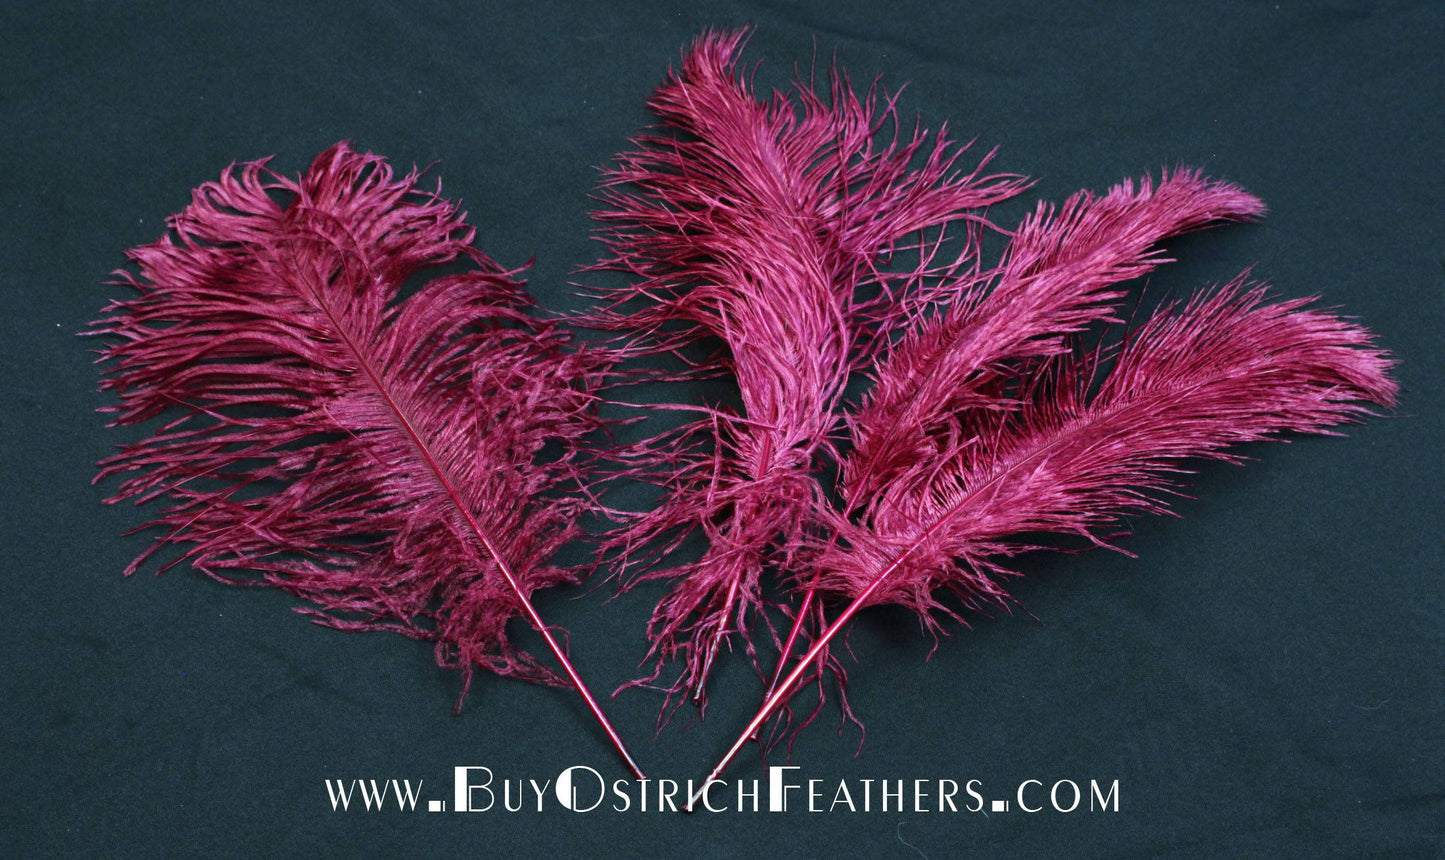 BULK 1/2lb Ostrich Feather Tail Plumes 15-20 (Red) for Sale Online